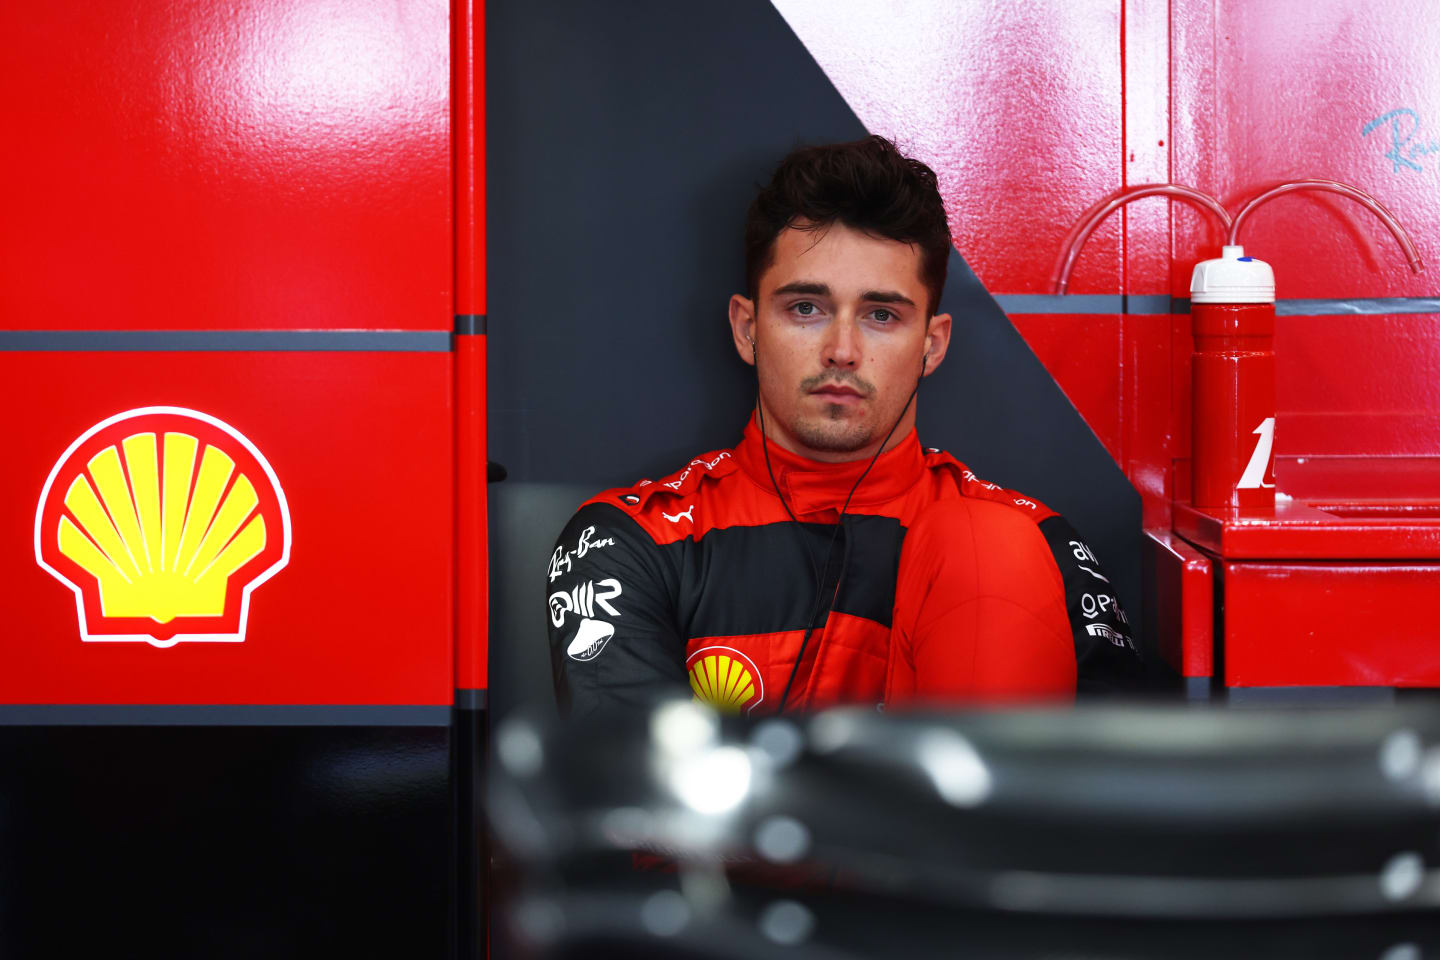 JEDDAH, SAUDI ARABIA - MARCH 25: Charles Leclerc of Monaco and Ferrari prepares to drive in the garage during practice ahead of the F1 Grand Prix of Saudi Arabia at the Jeddah Corniche Circuit on March 25, 2022 in Jeddah, Saudi Arabia. (Photo by Lars Baron/Getty Images)